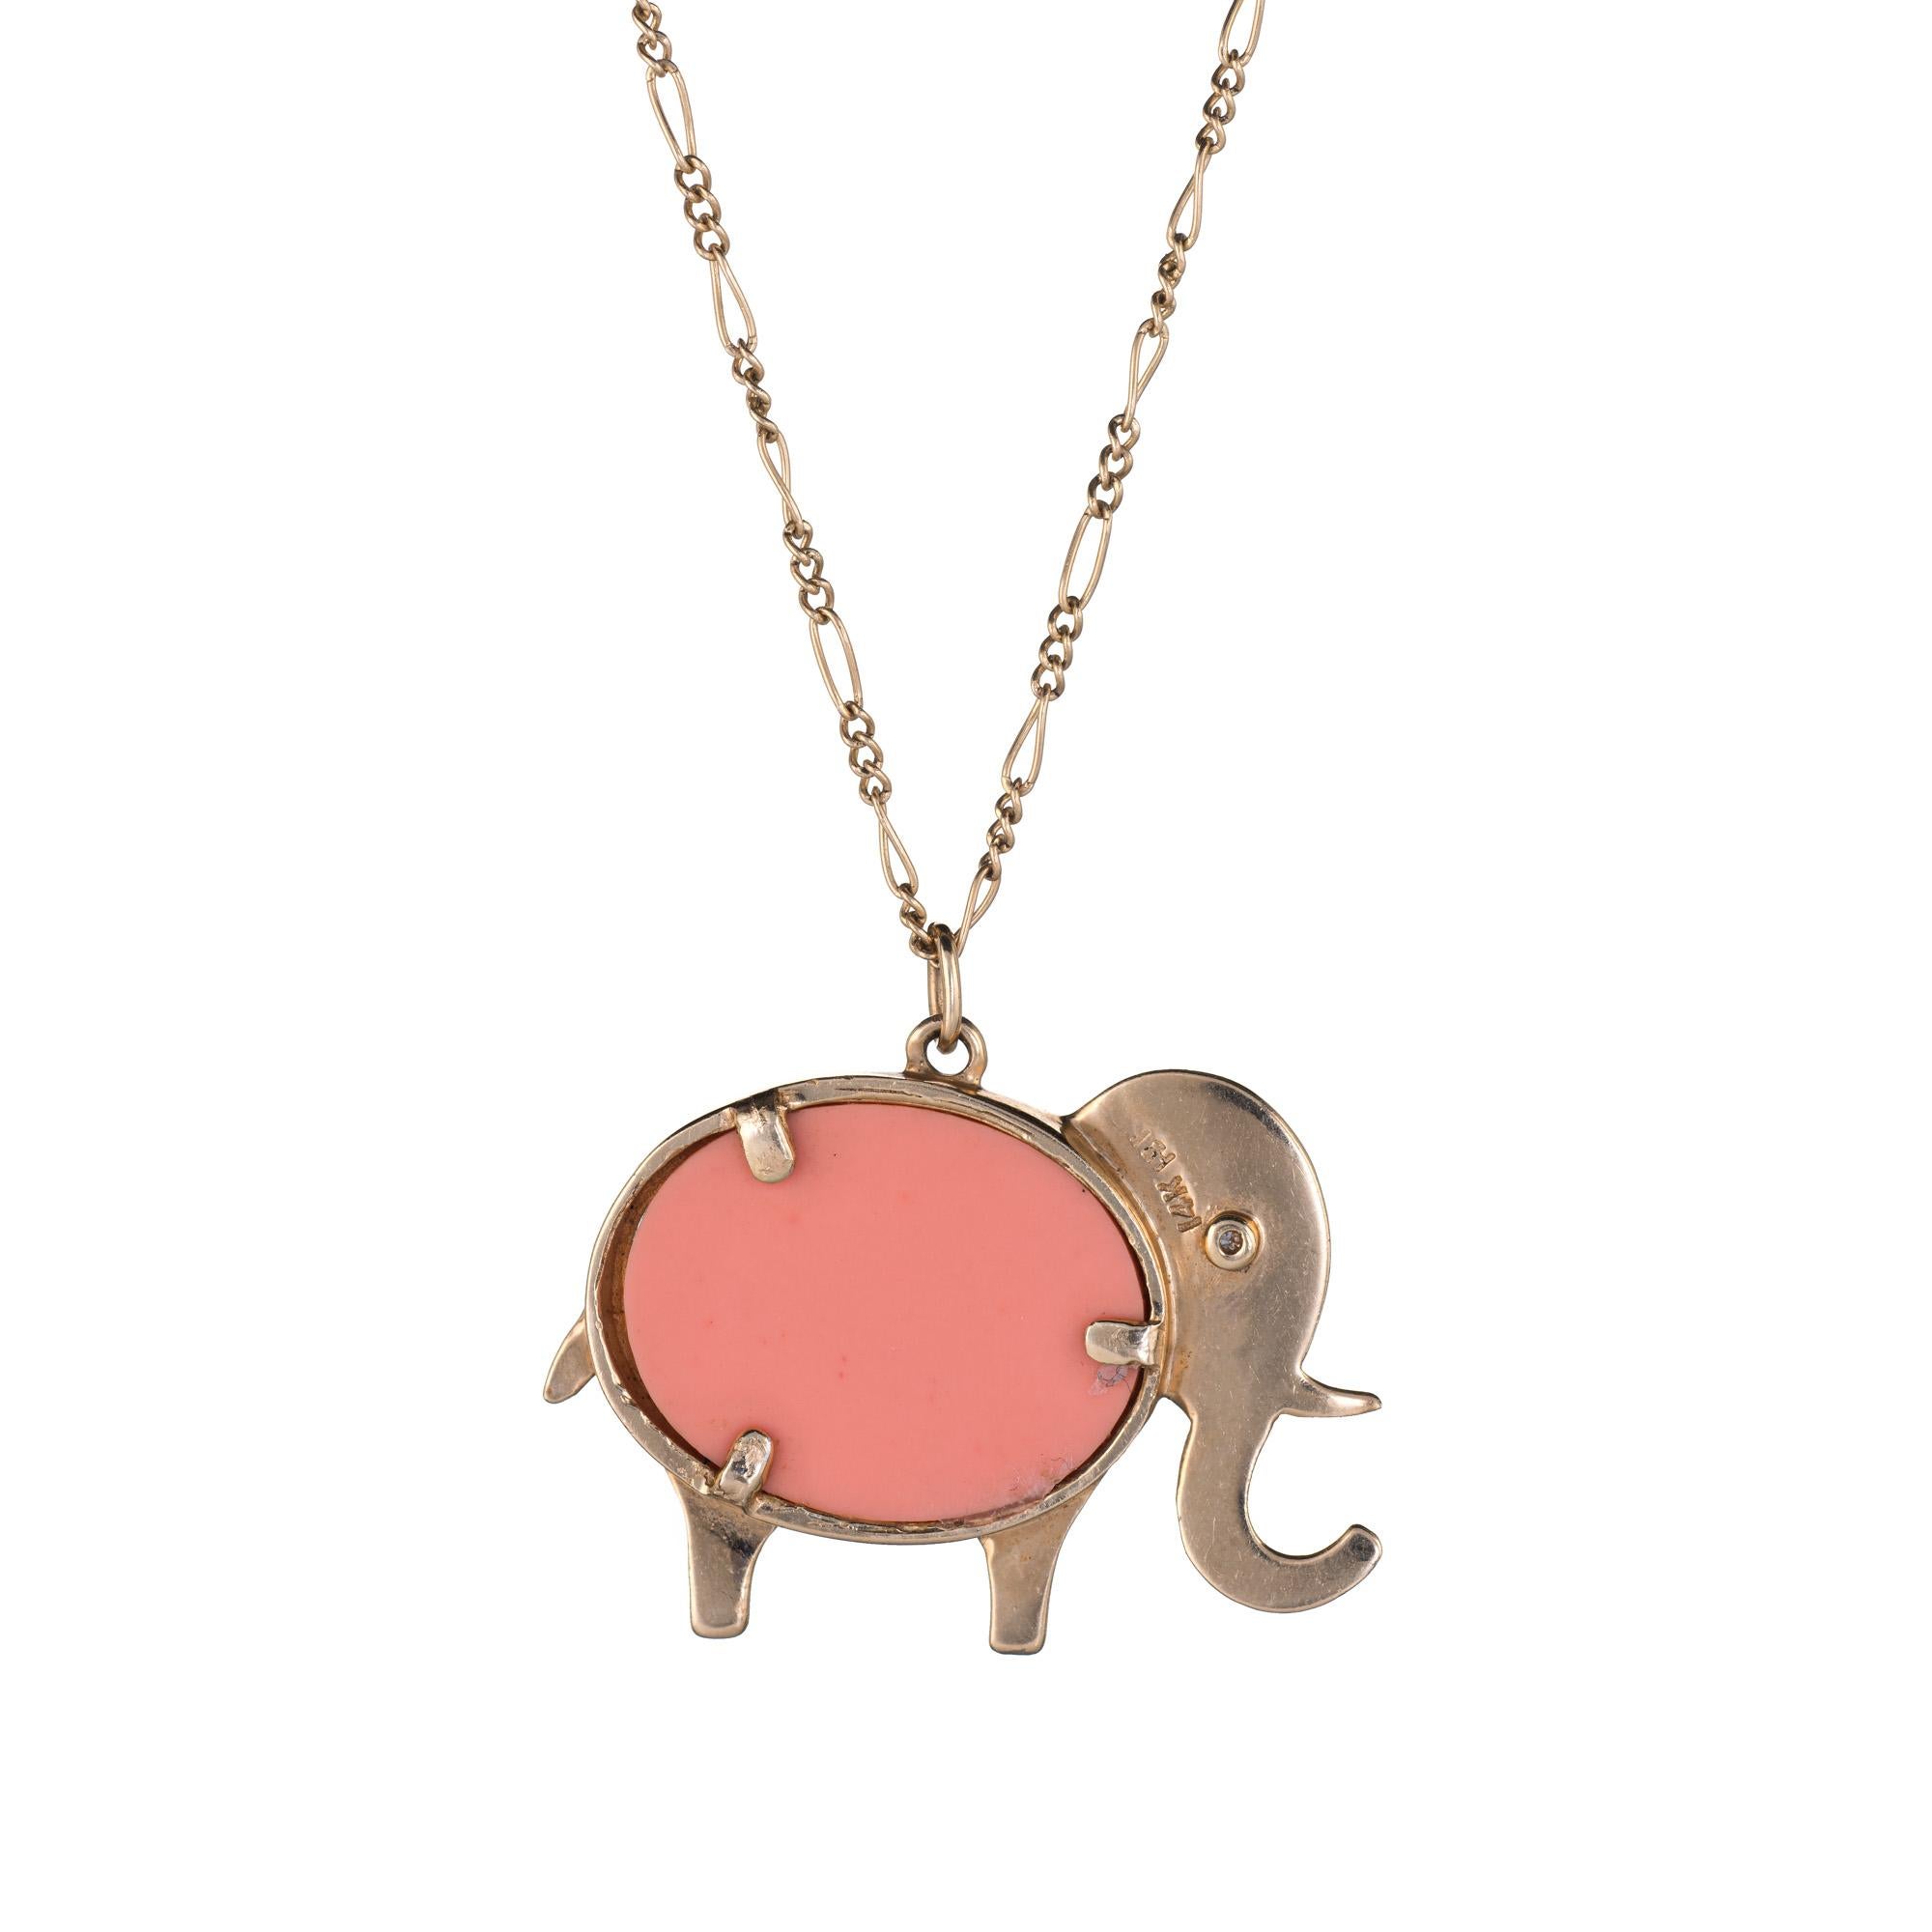 Finely detailed vintage Hammerman Bros elephant pendant crafted in 14 karat yellow gold.  

The elephant is set with composite coral in the body and a small estimated 0.01 carat diamond in the eye (estimated at G-H color and VS2 clarity).   

The